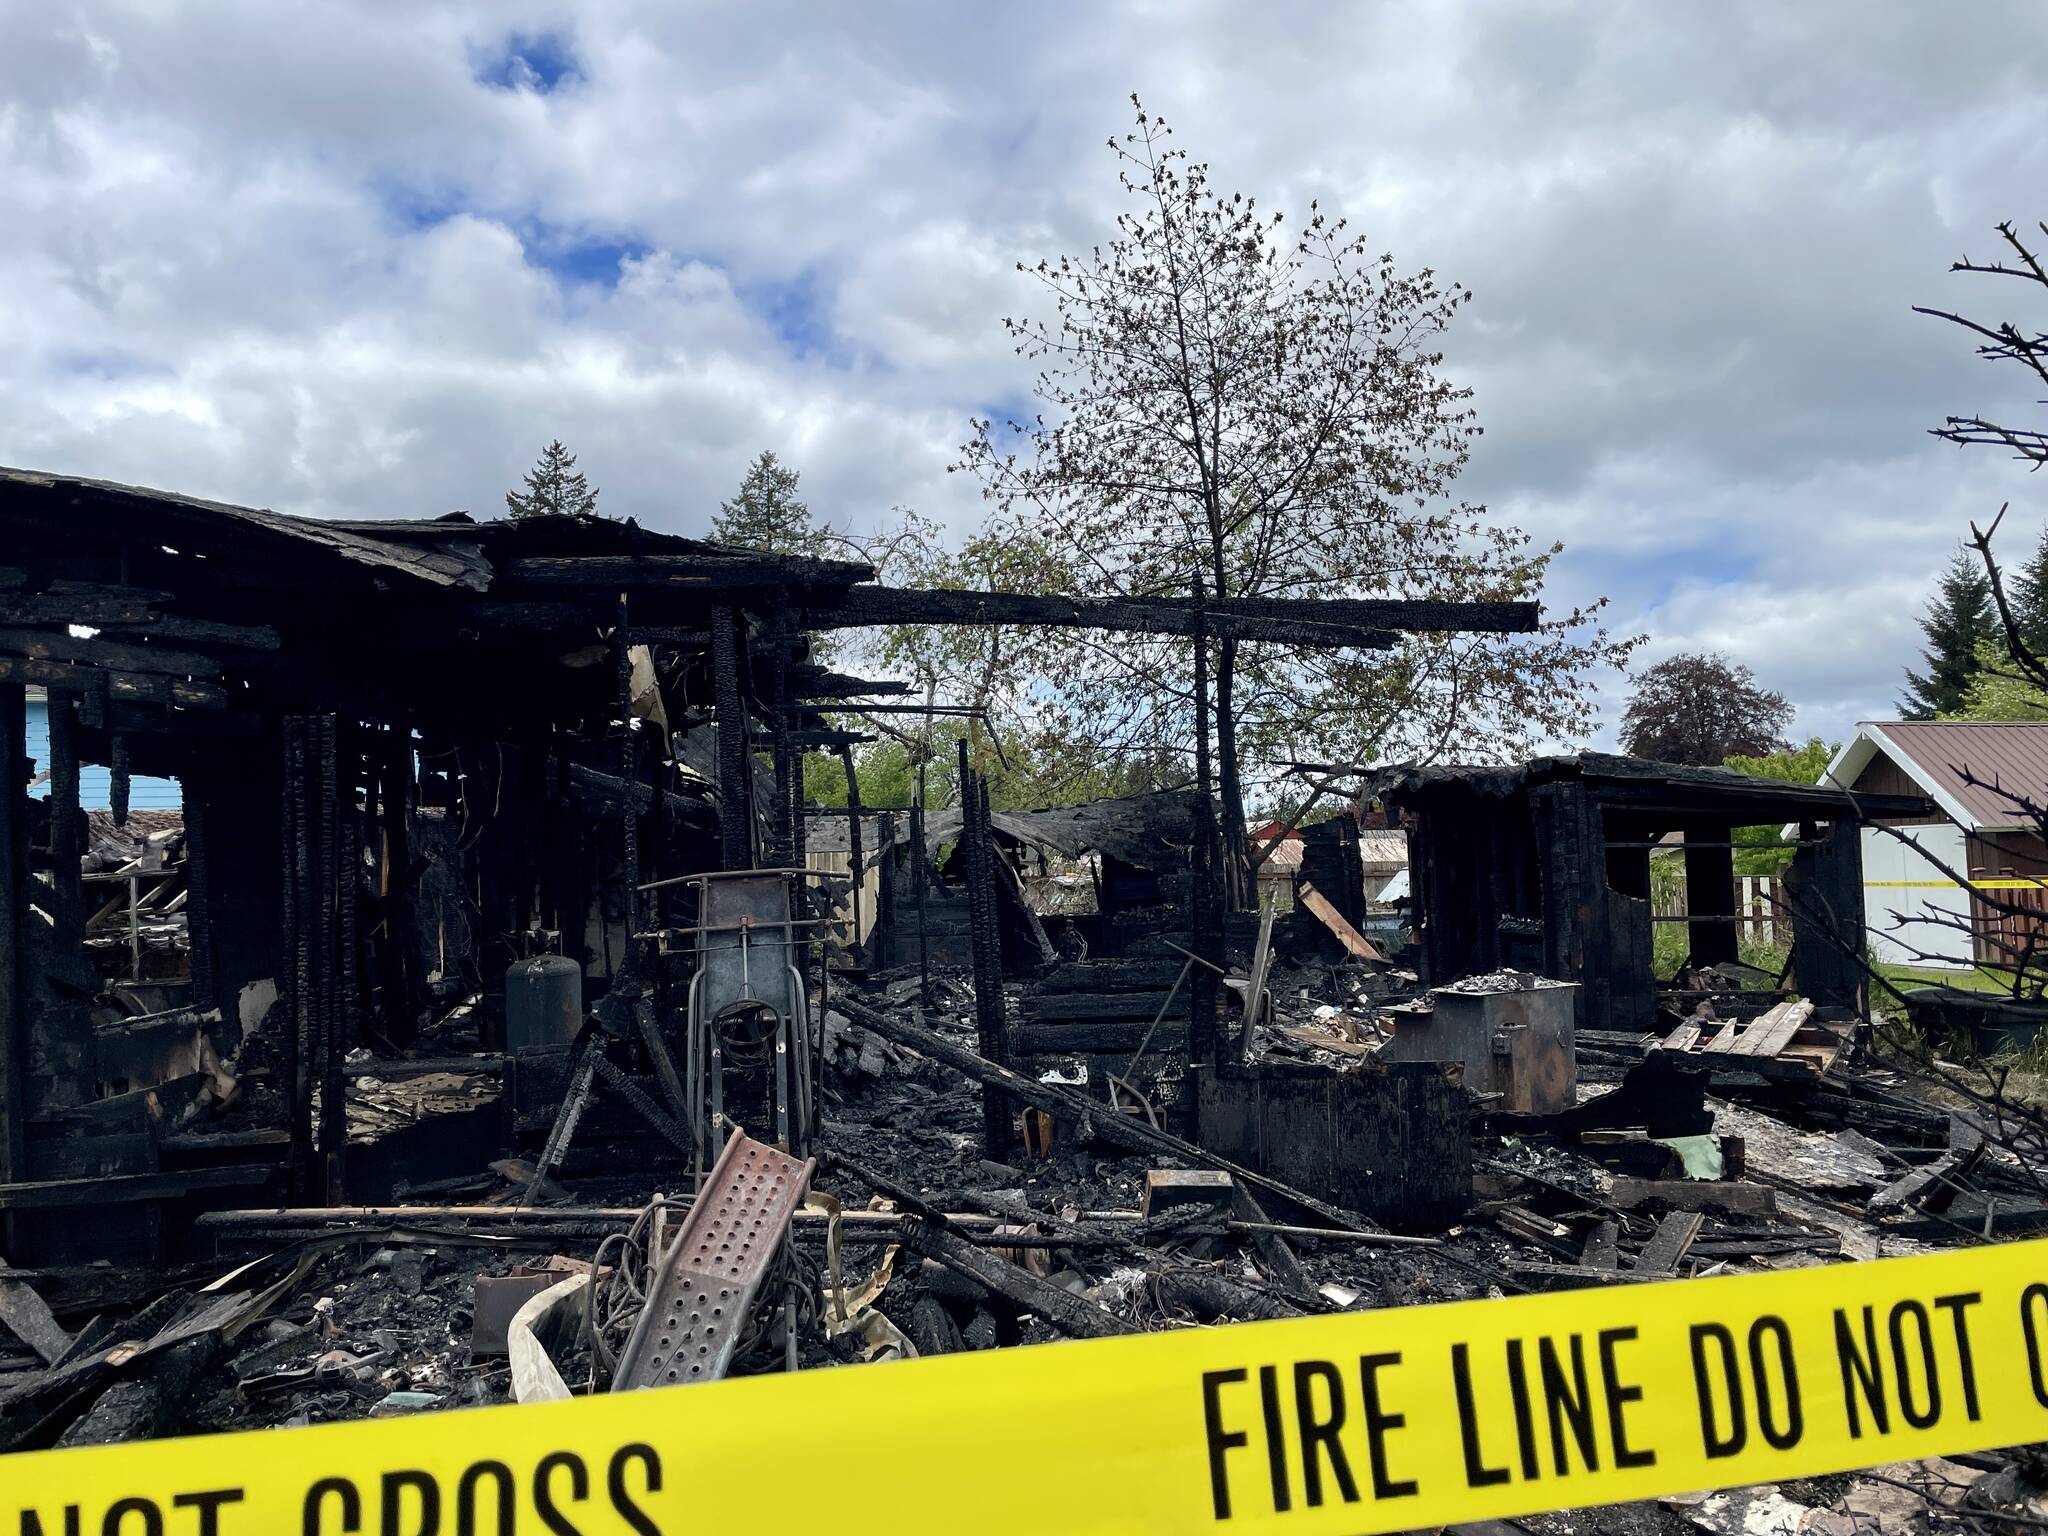 An Oakville house was completely destroyed by fire on Sunday. (MIchael S. Lockett / The Daily World)